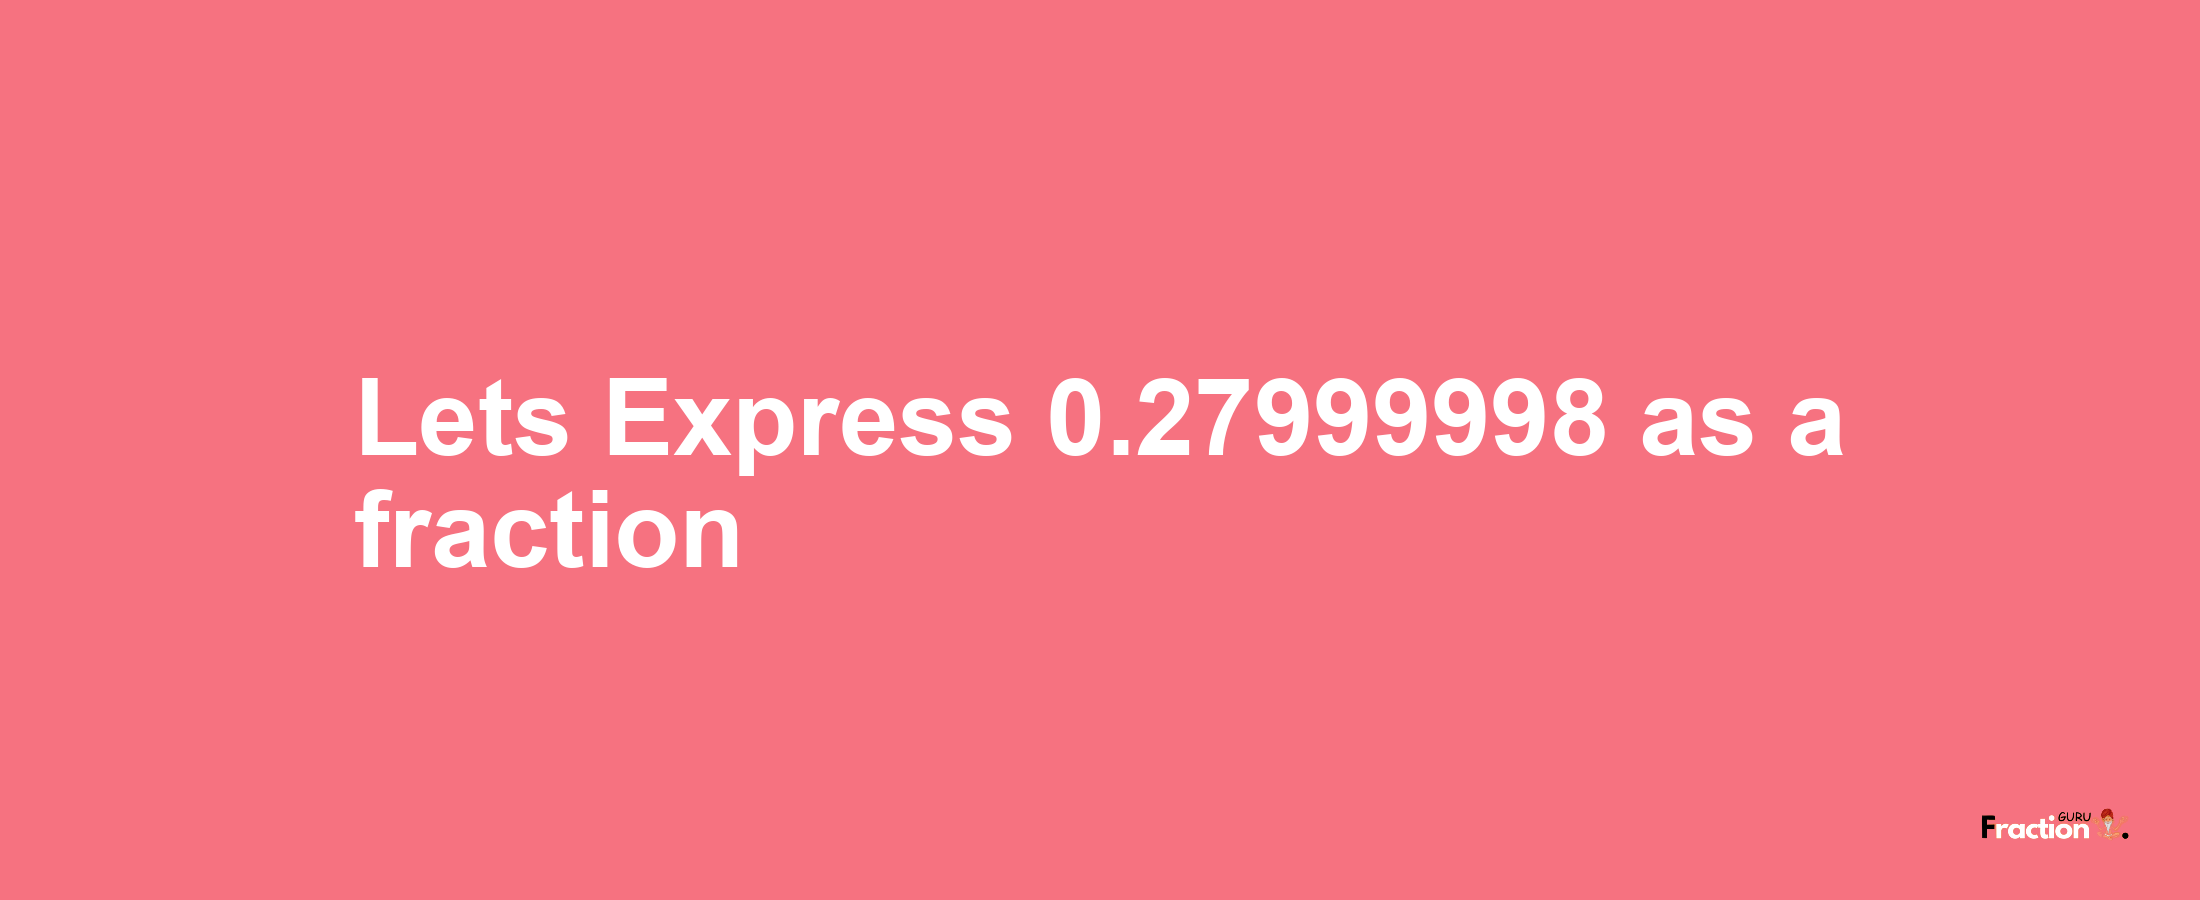 Lets Express 0.27999998 as afraction